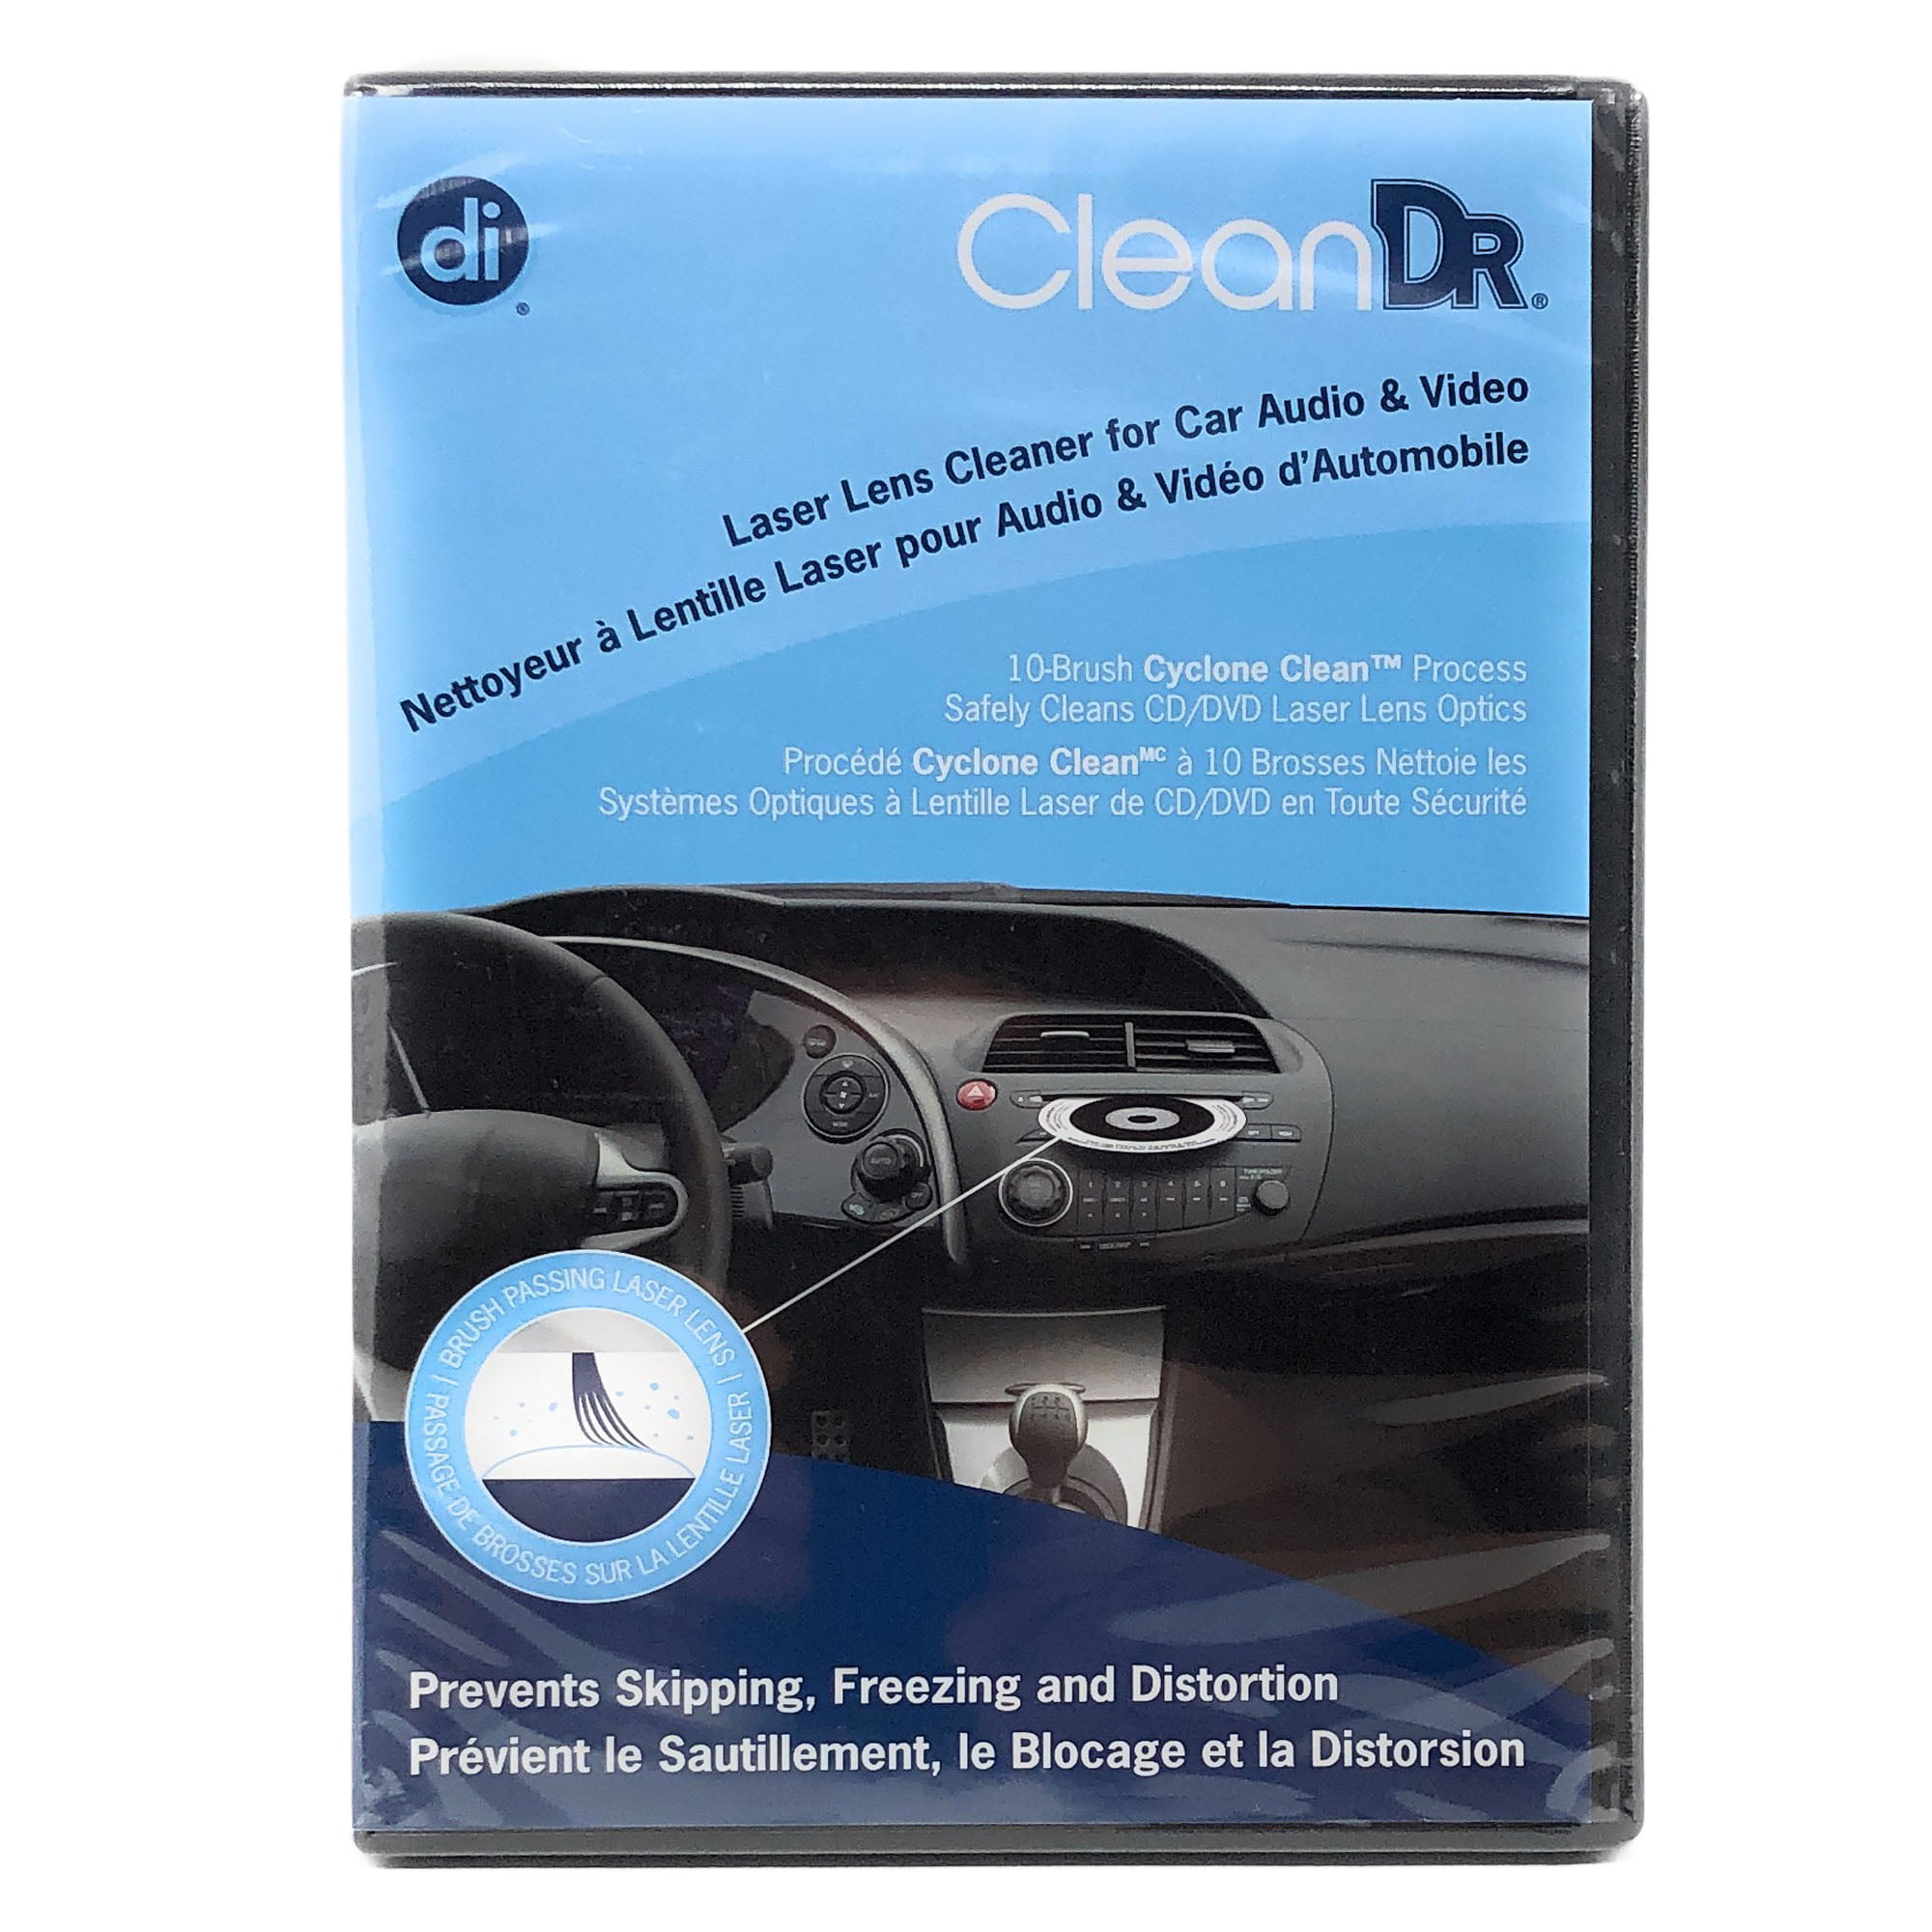 CD Lens Cleaner for Car Audio and Video with 10-Brush Cyclone Clean Process